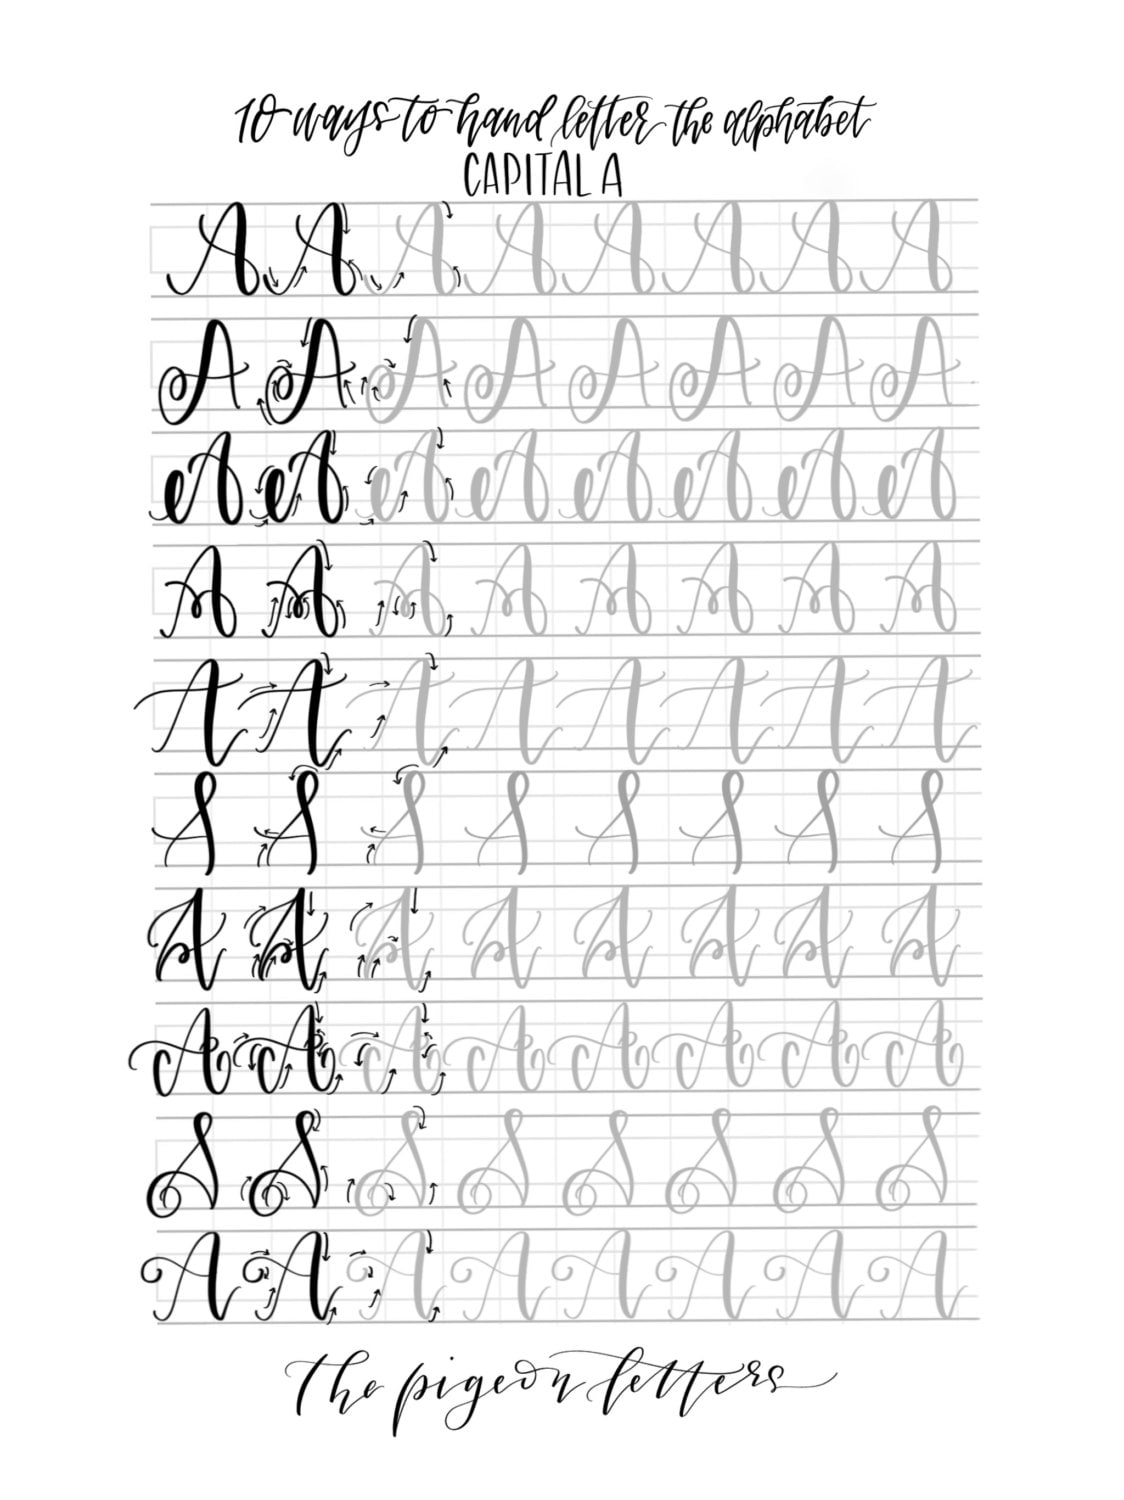 bundle-save-hand-lettering-practice-sheets-by-thepigeonletters